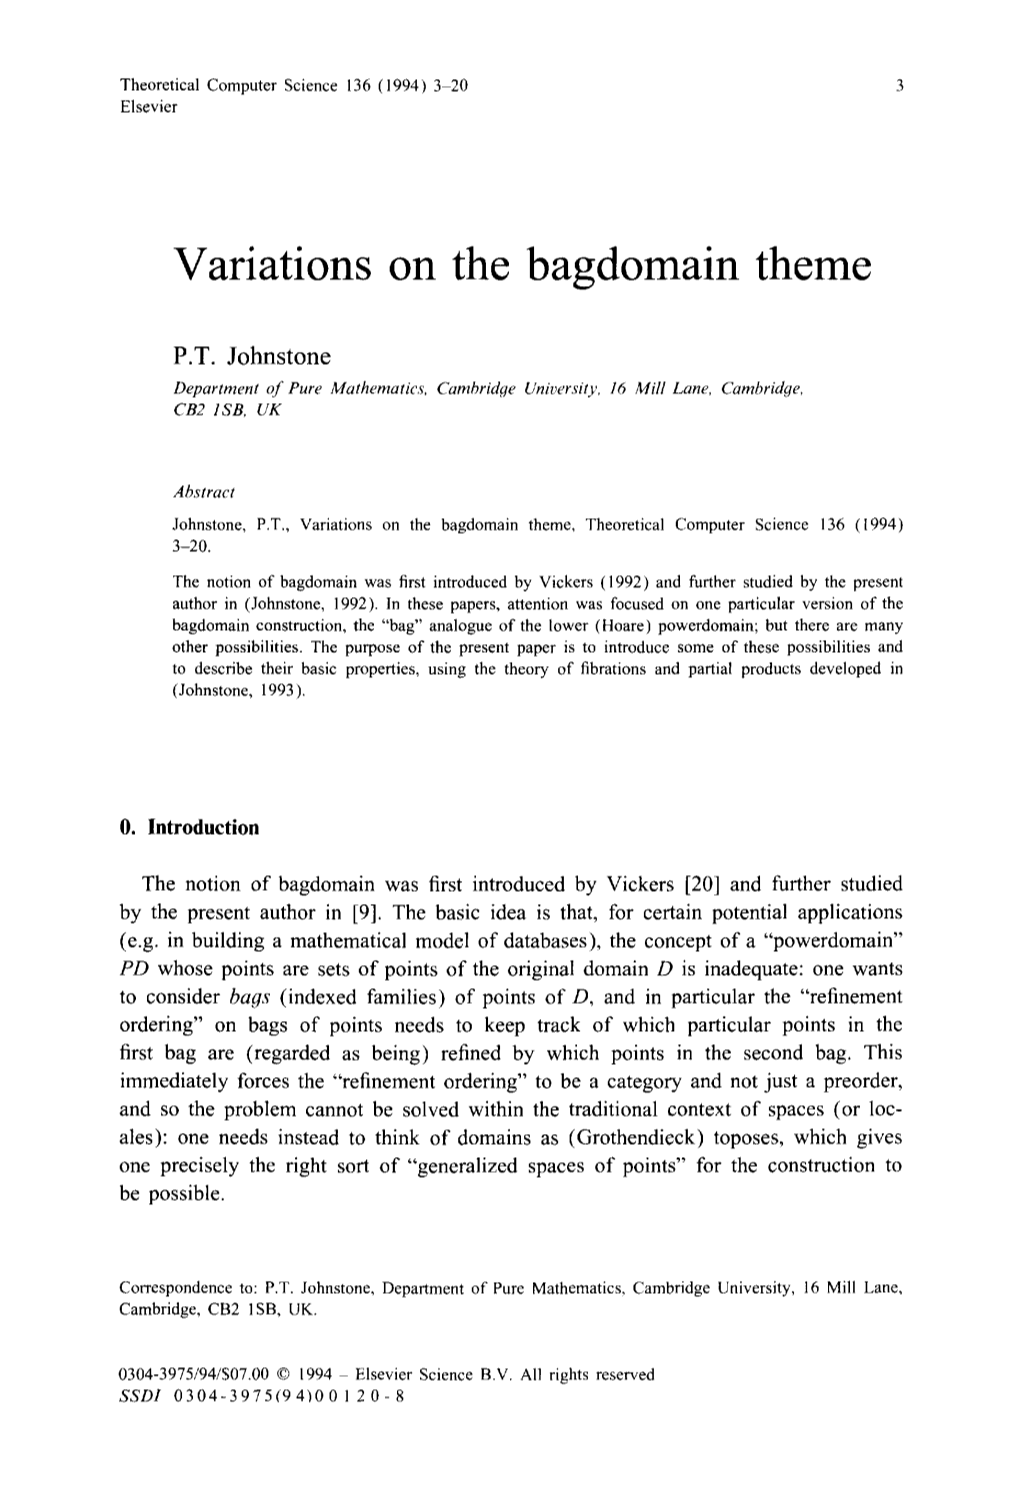 Variations on the Bagdomain Theme